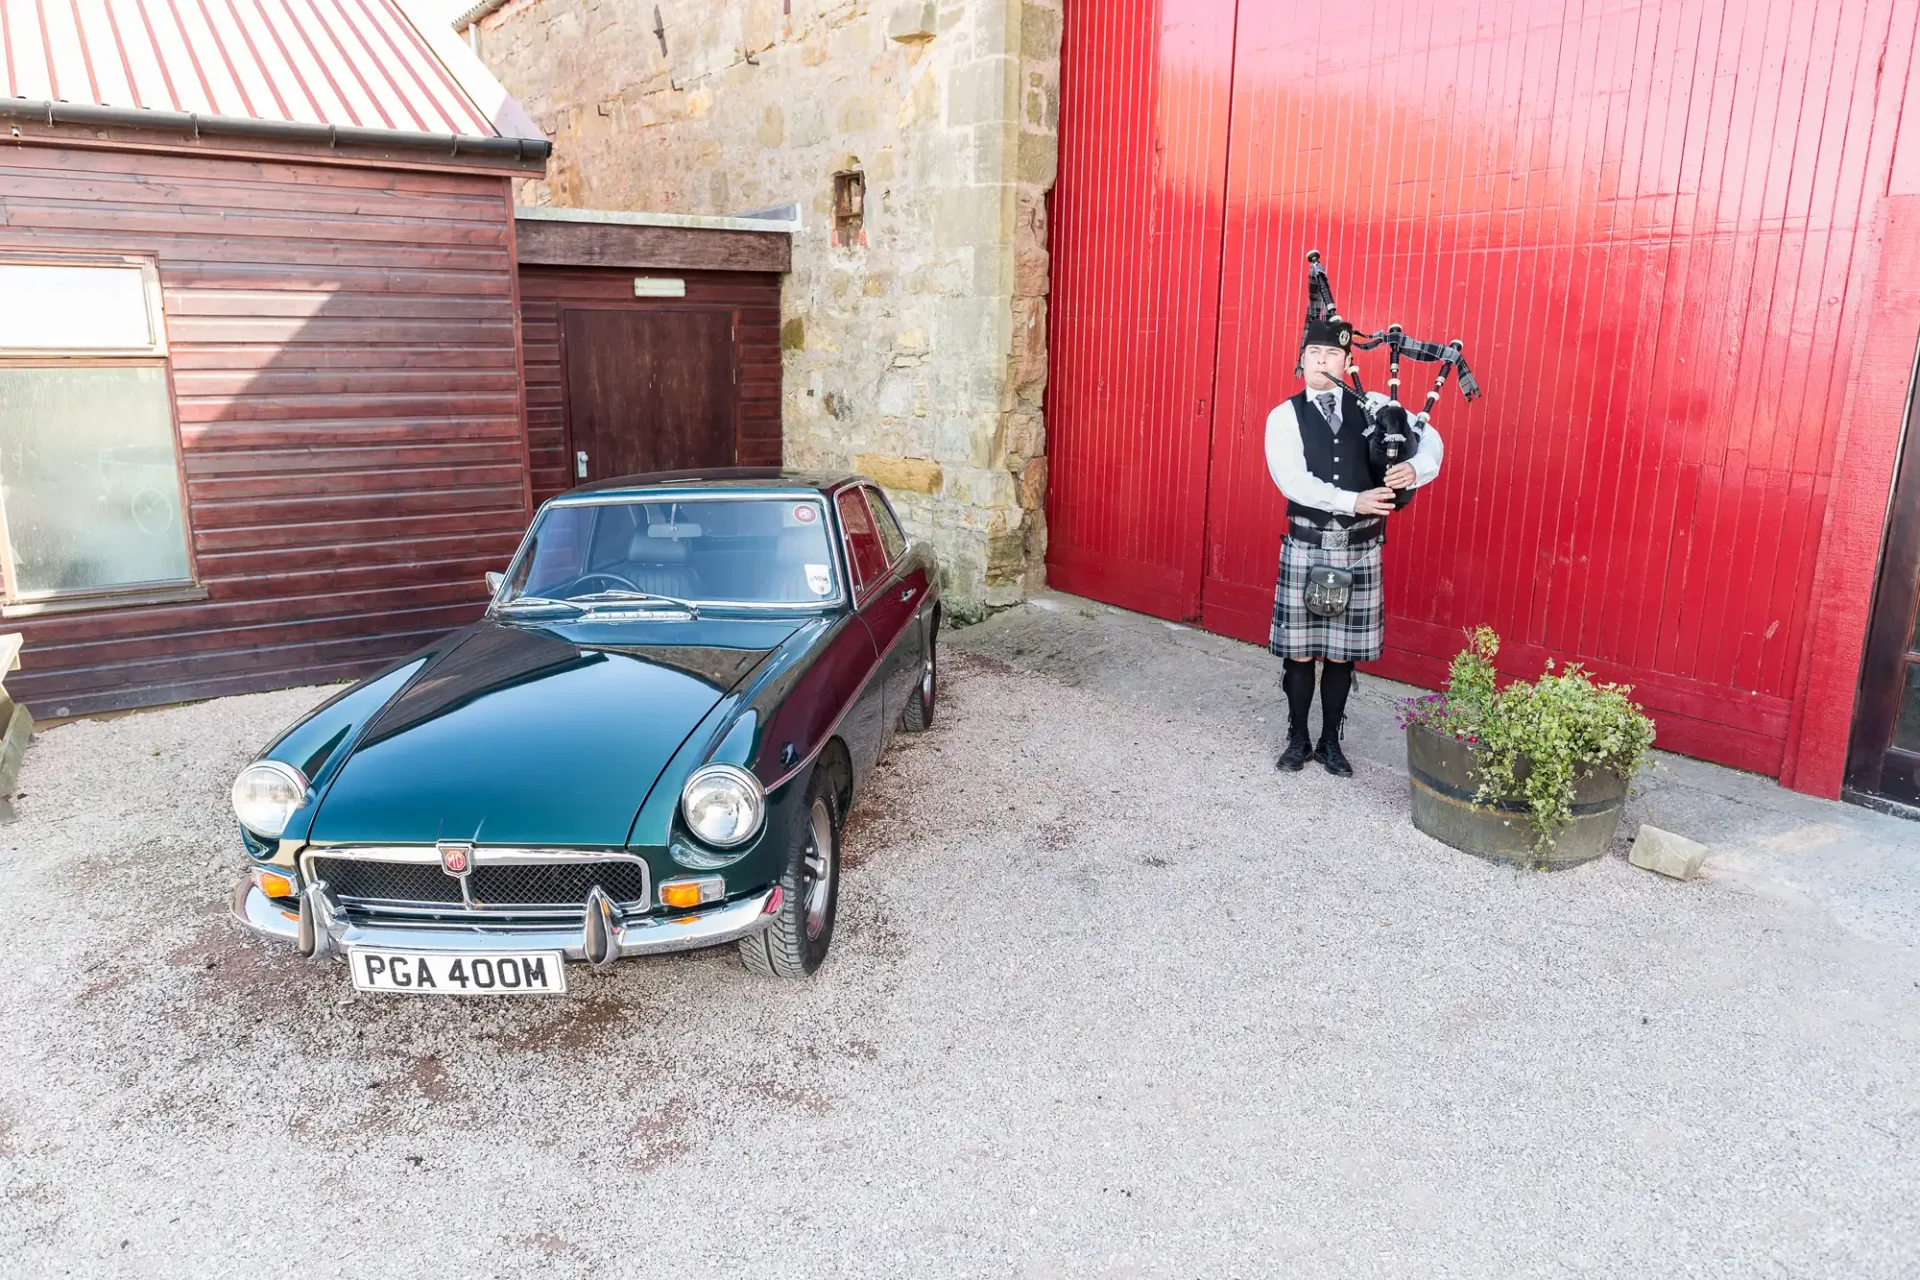 A man in traditional scottish attire playing bagpipes beside a classic dark blue mg car, in a courtyard with red and stone walls.